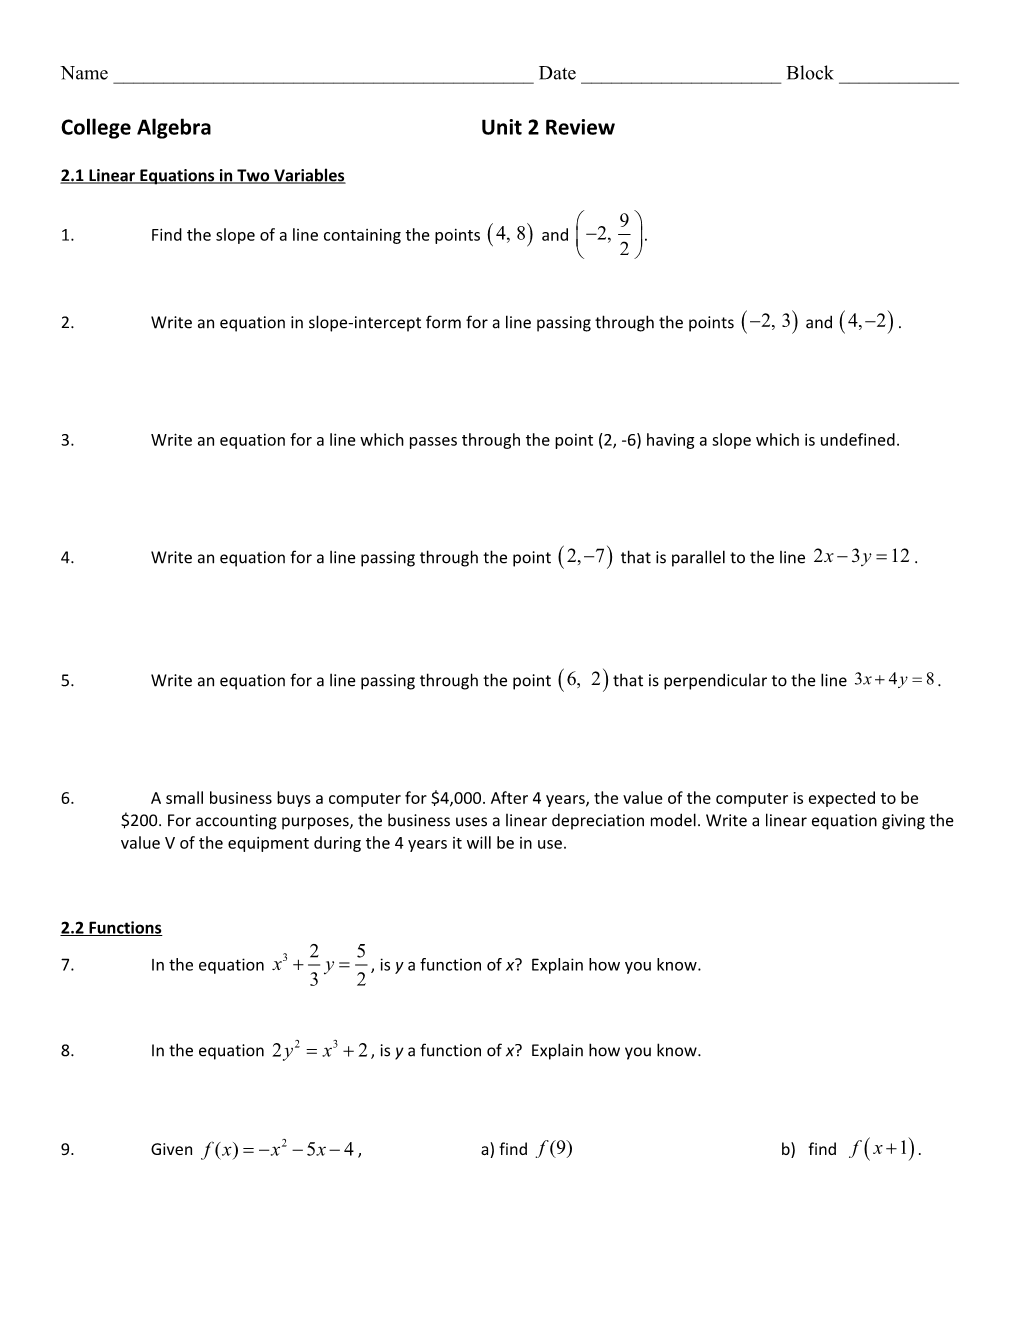 2.1 Linear Equations in Two Variables